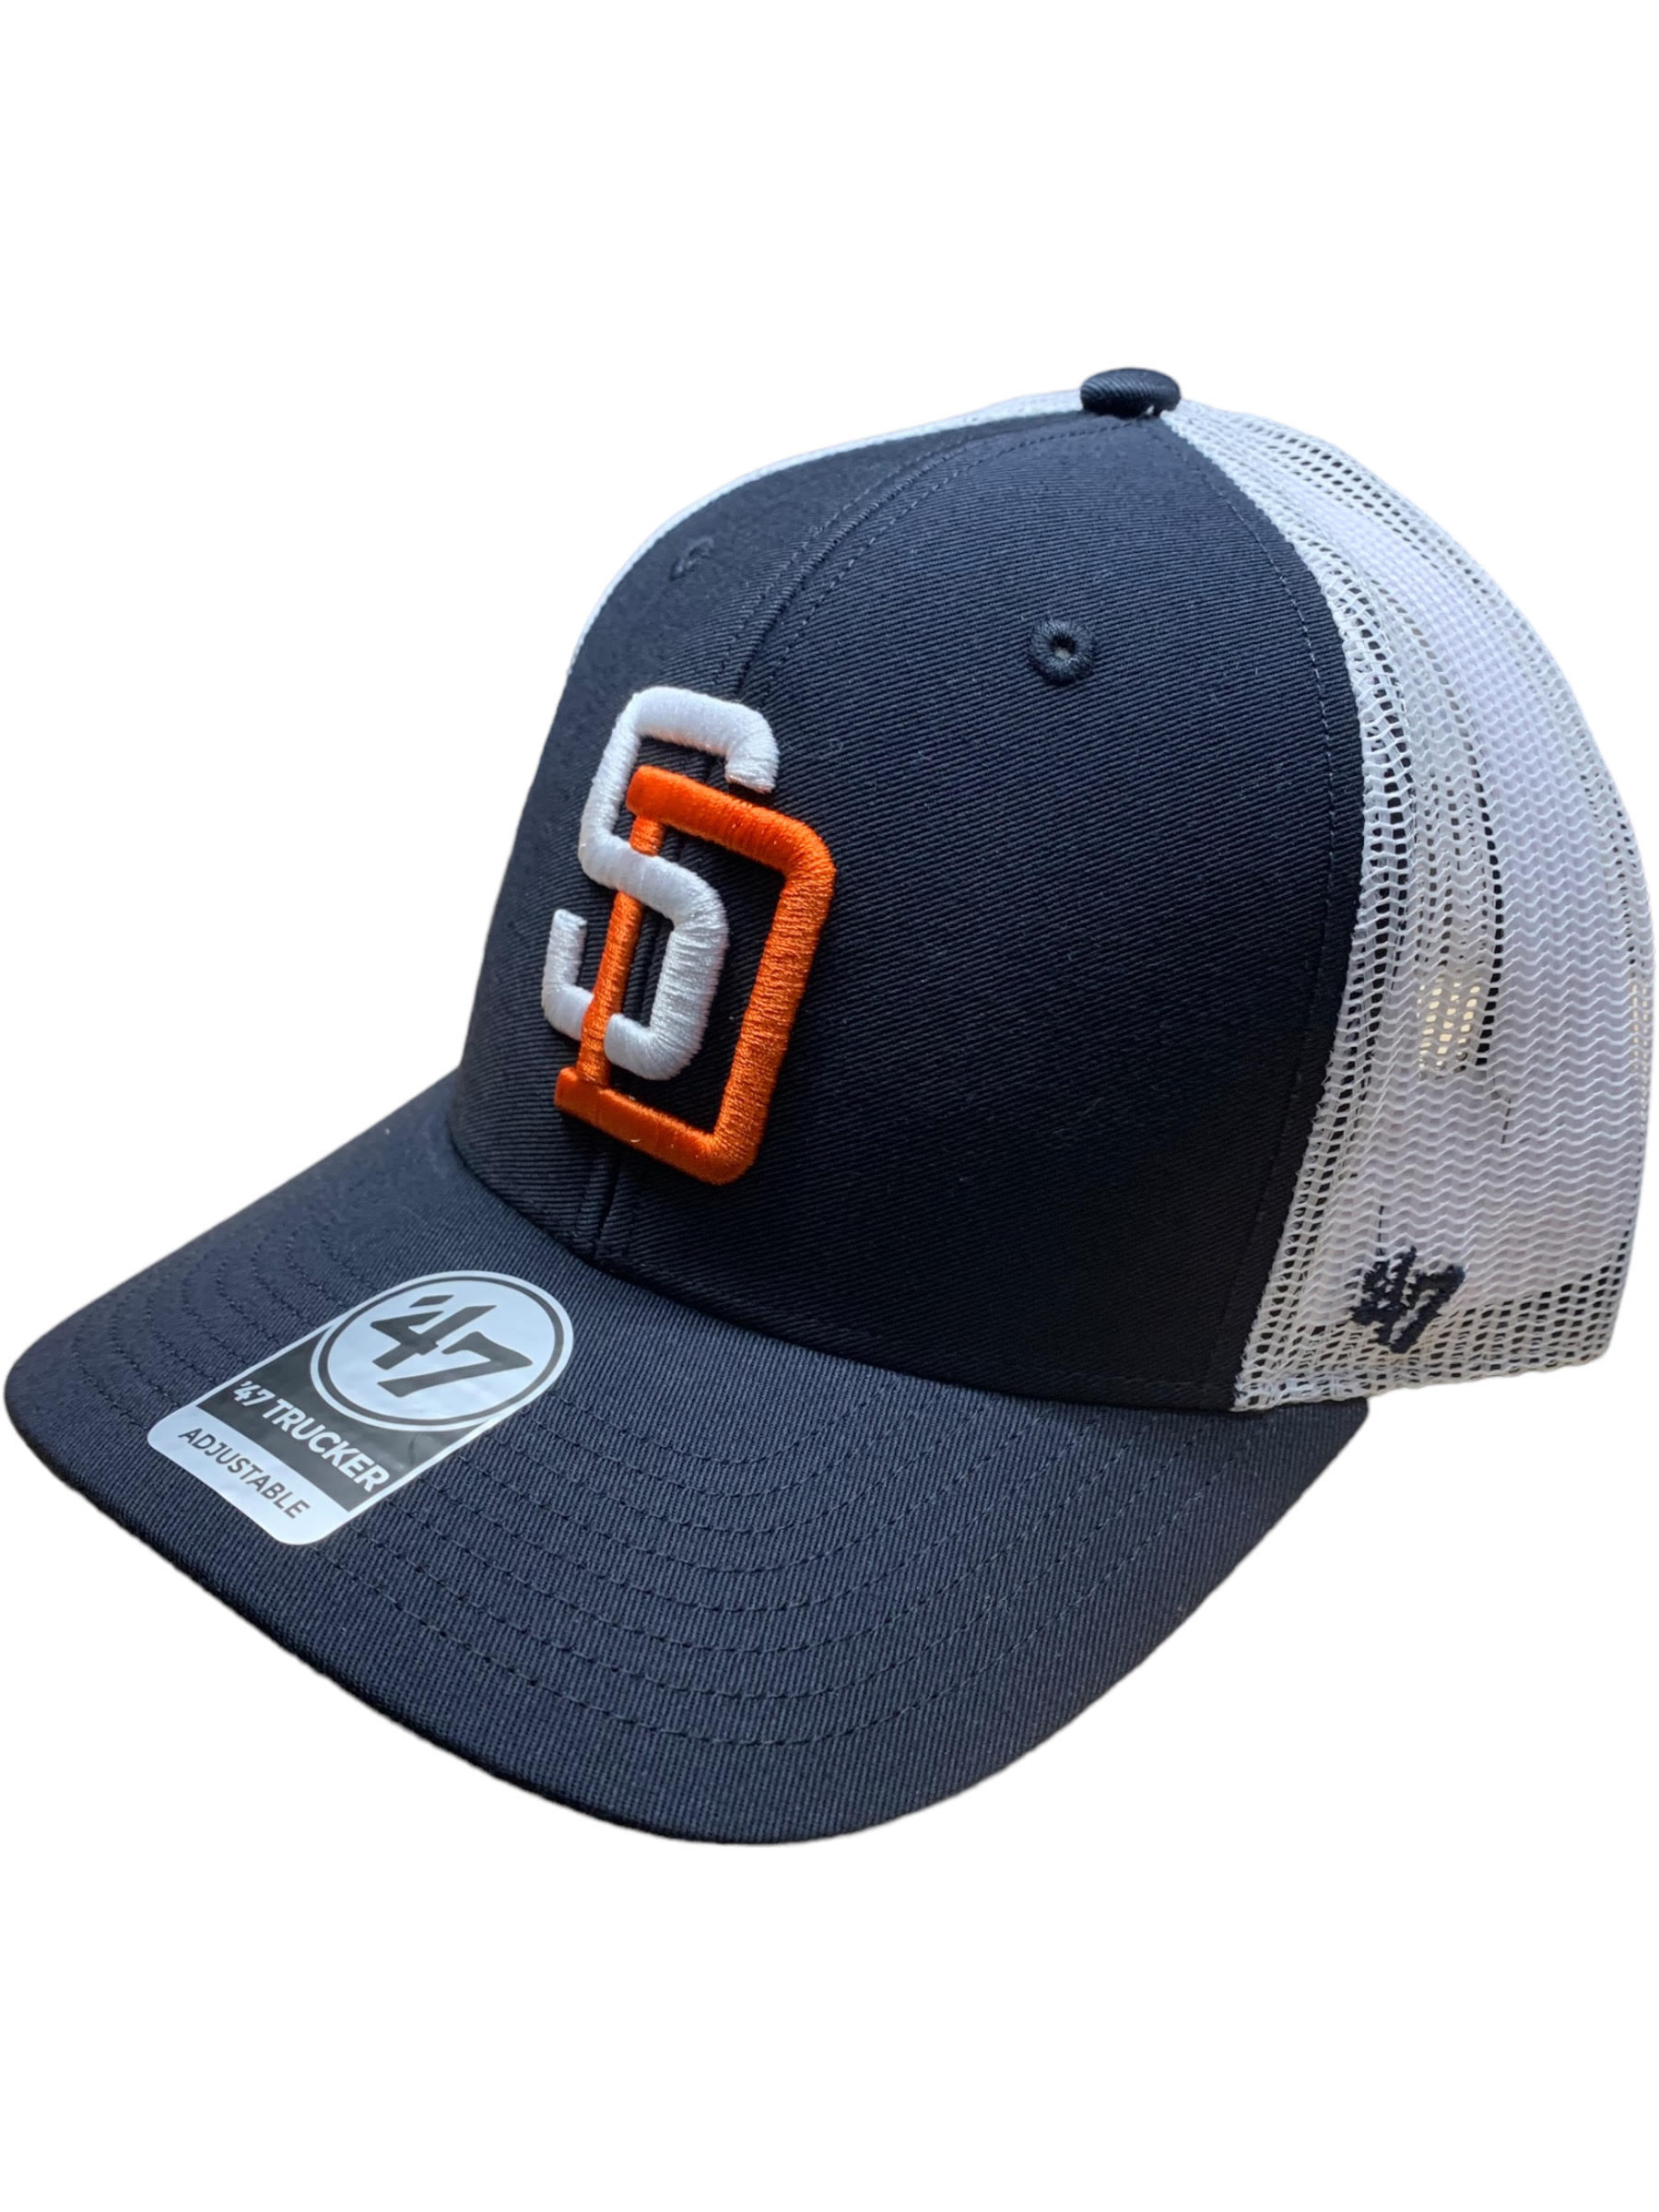 47 San Diego Padres MLB Fan Cap, Hats for sale